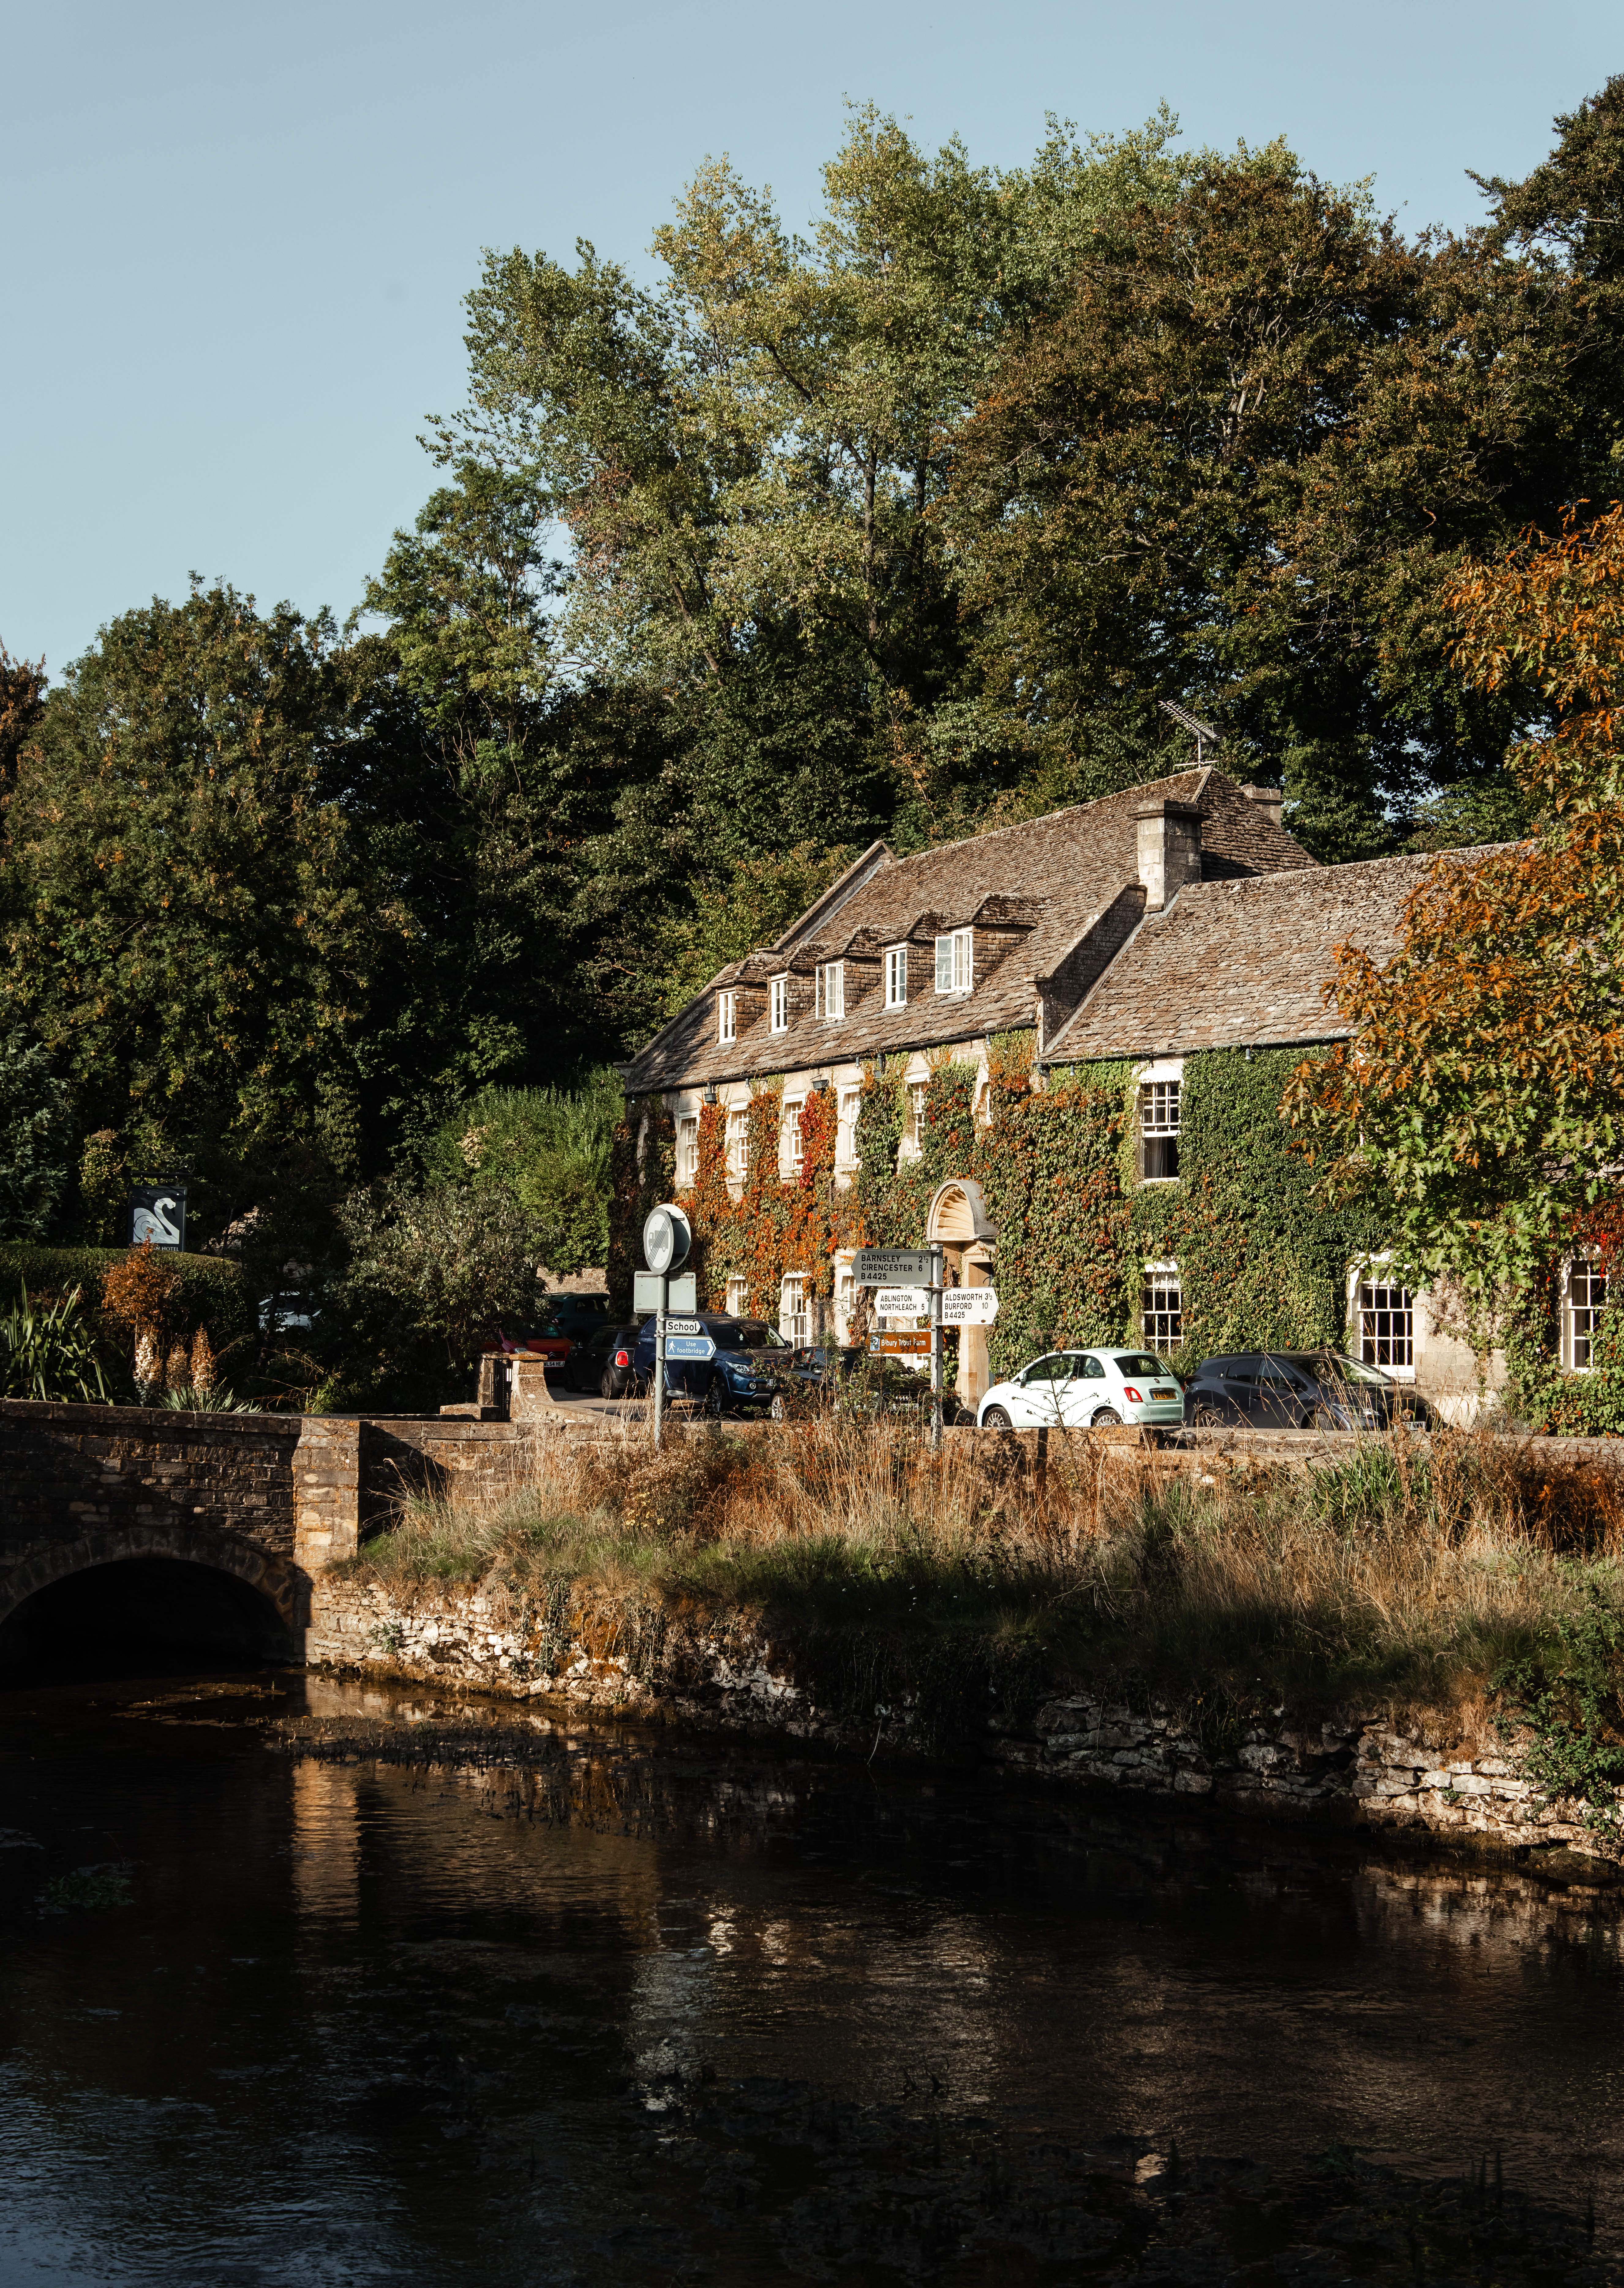 A ROAD TRIP ROUTE TO THE COTSWOLDS